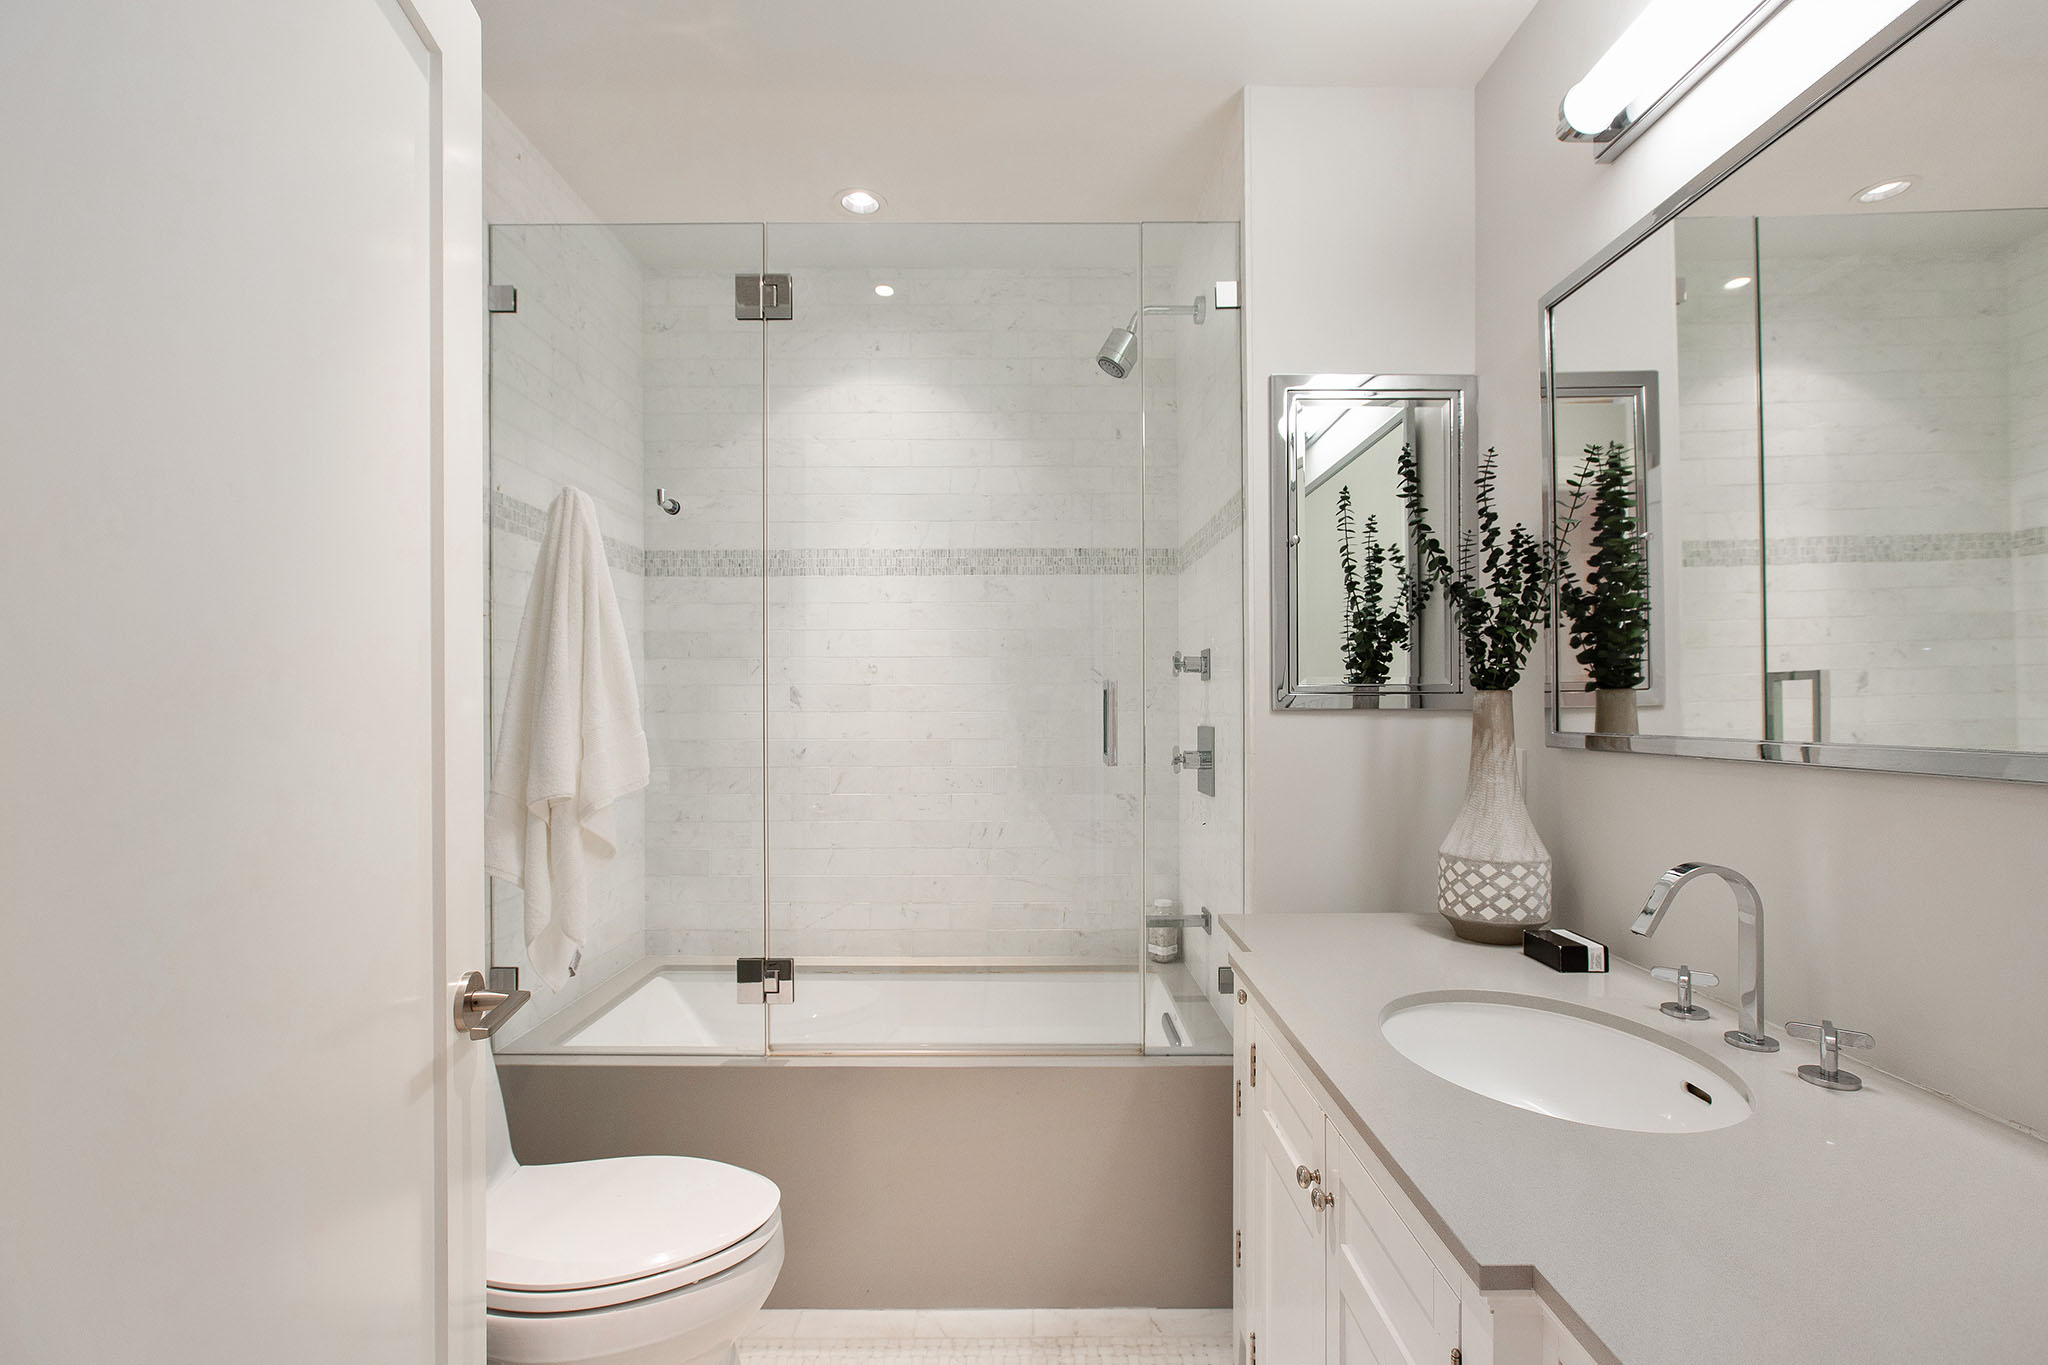 Property Photo: First bathroom has a tub/shower combo. There is one sink and grey countertops. 